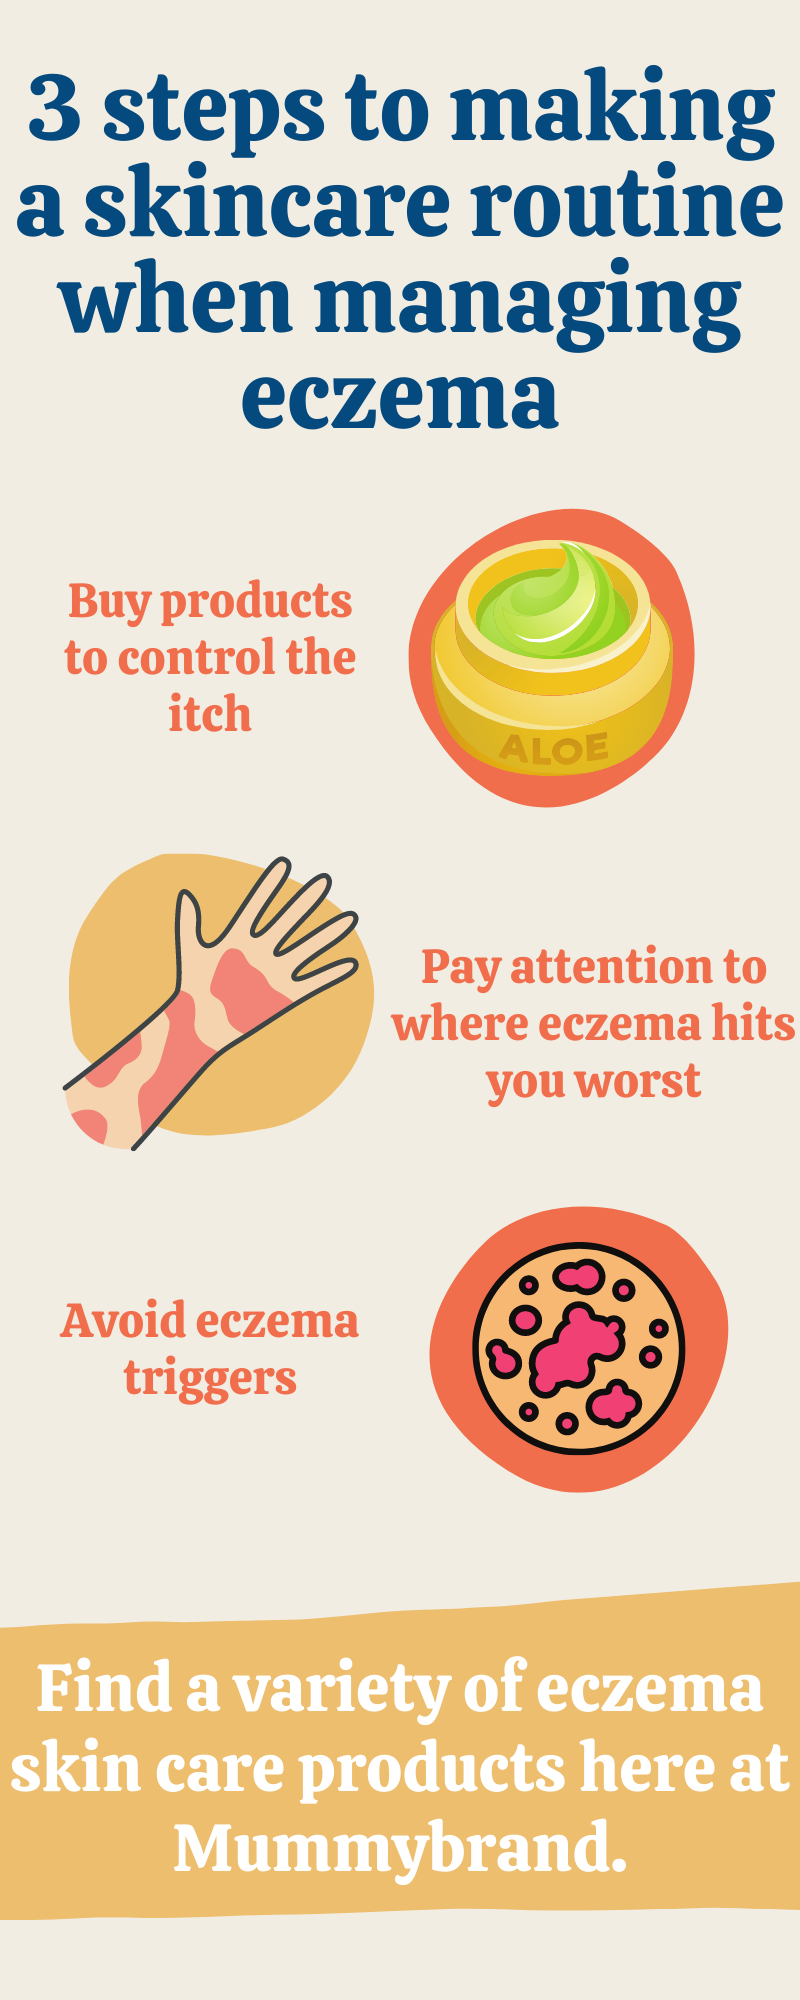 3 Steps To Making A Skincare Routine When Managing Eczema